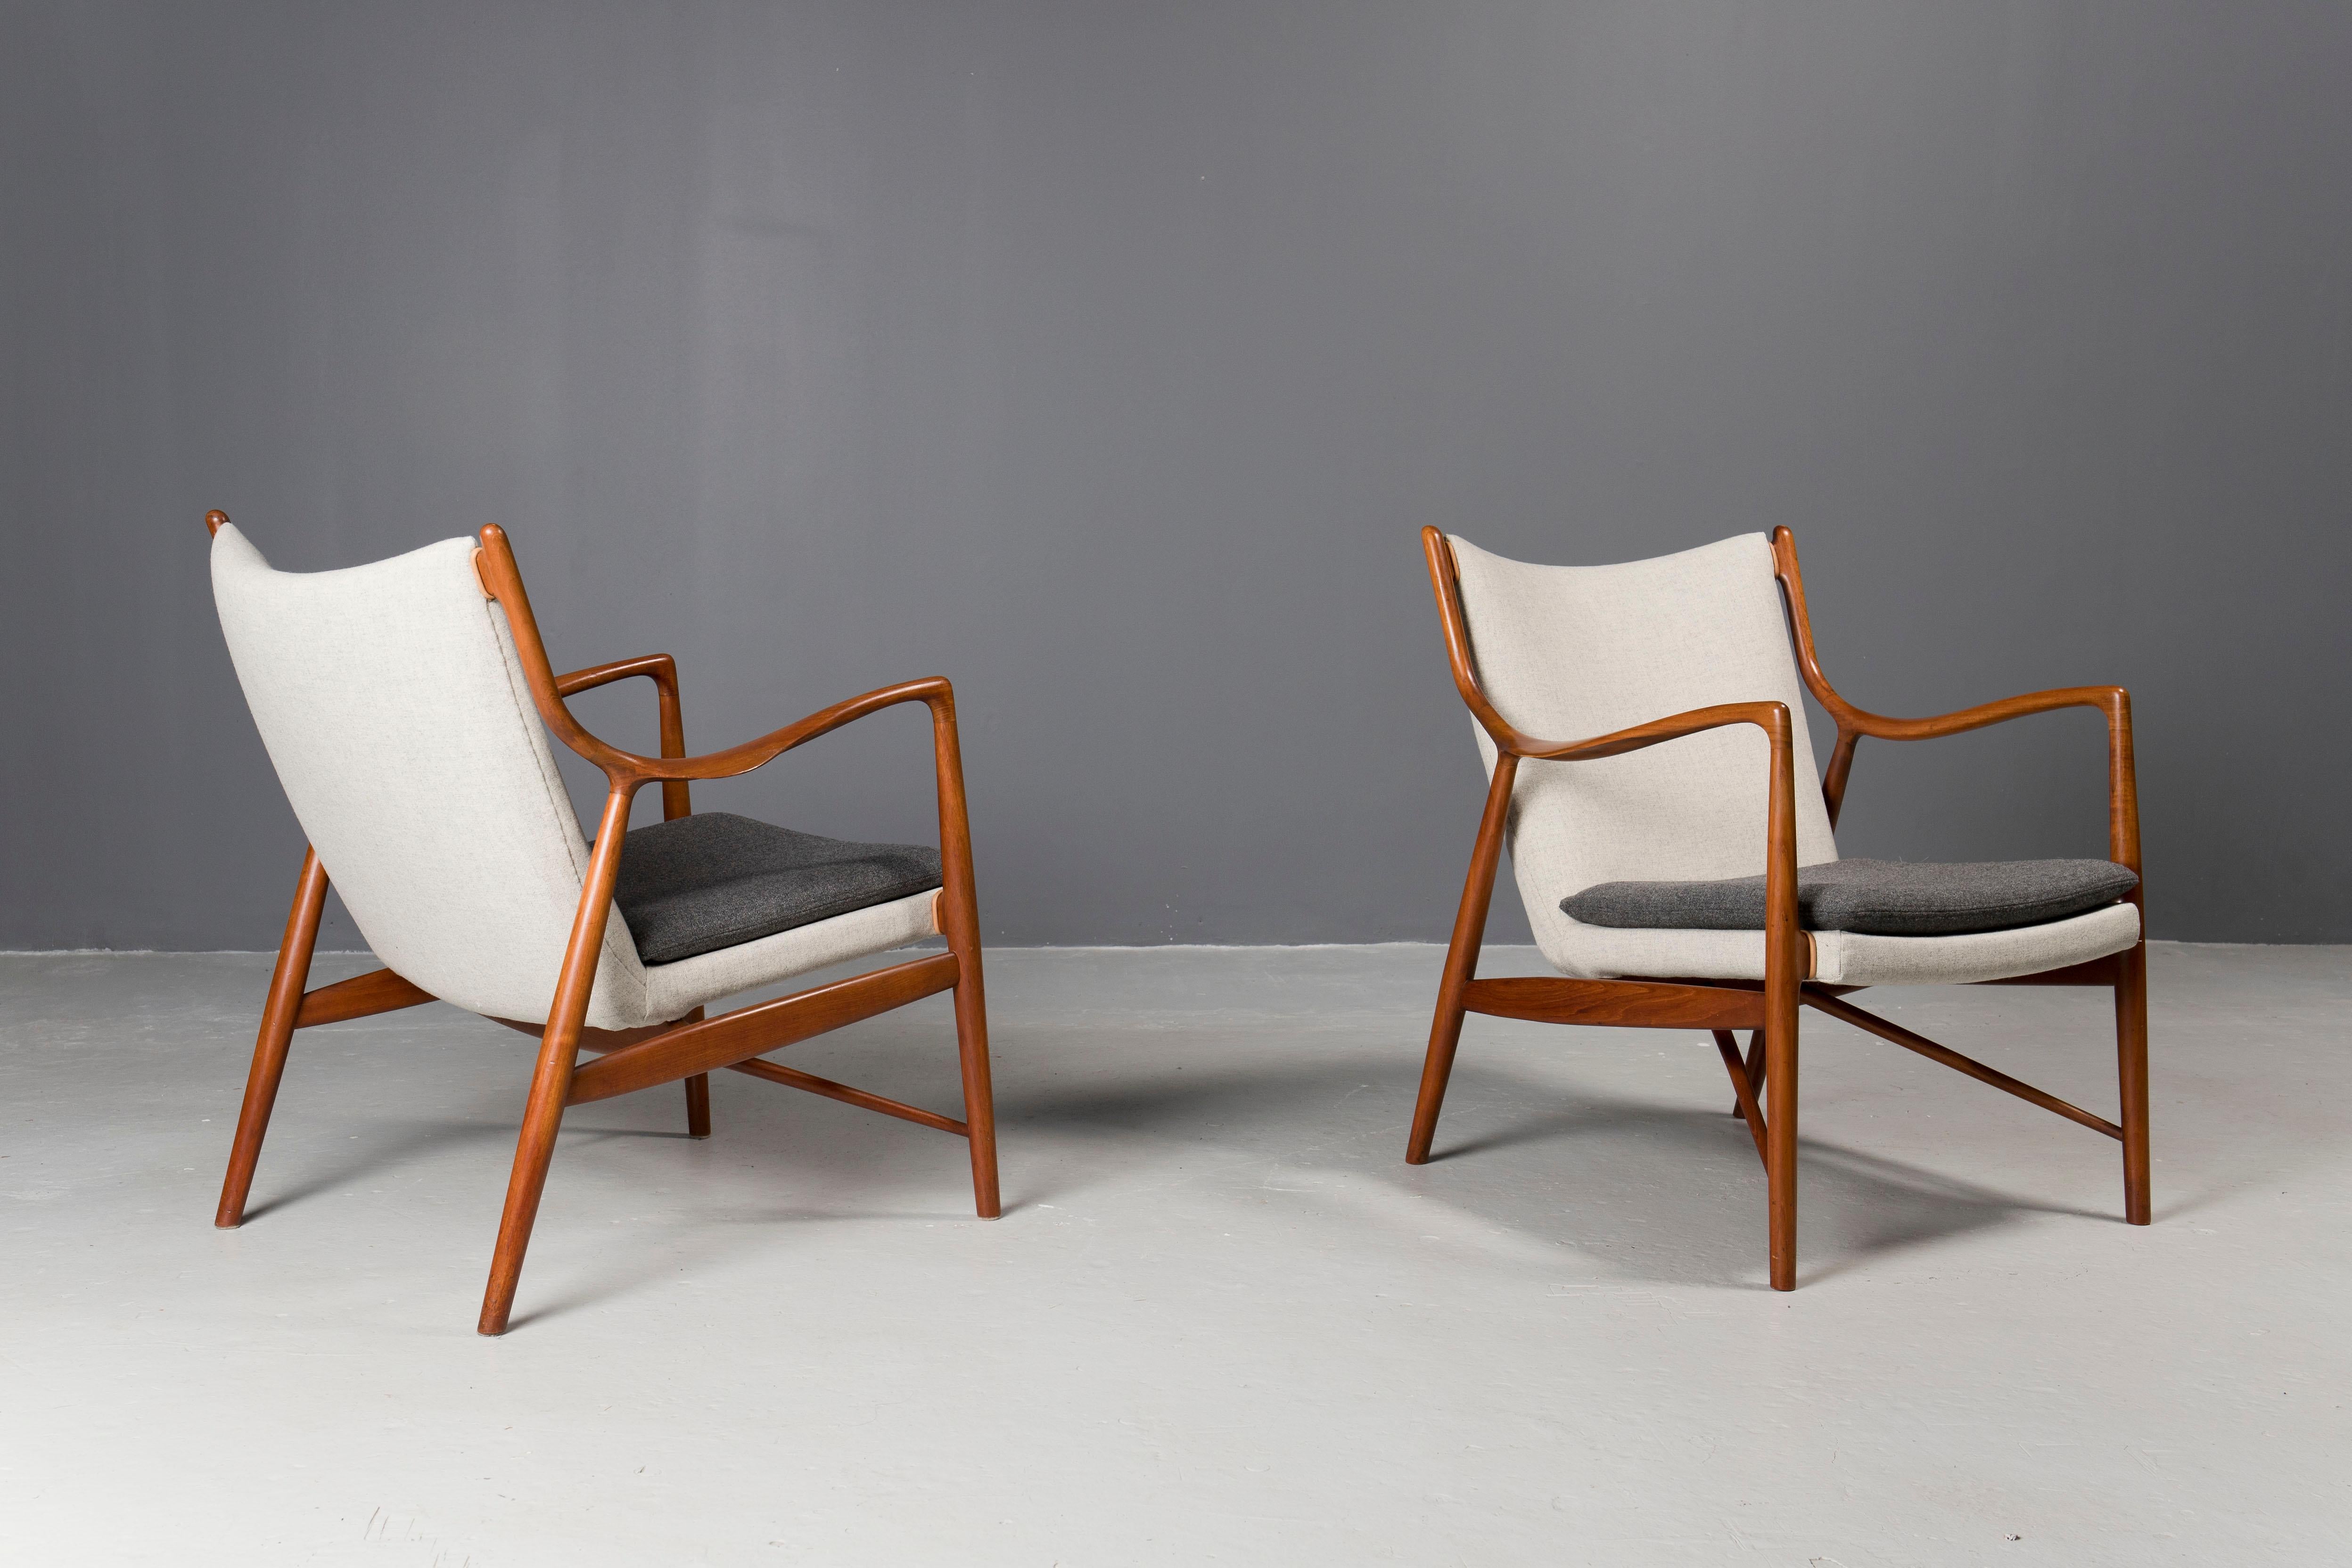 One of most iconic designs by Danish architect Finn Juhl,  this pair of 45 chairs was executed by his cabinetmaker Niels Vodder in the early 1950s.
Sculptural teak frames have been professionally refinished and upholstery is newly upgraded in danish